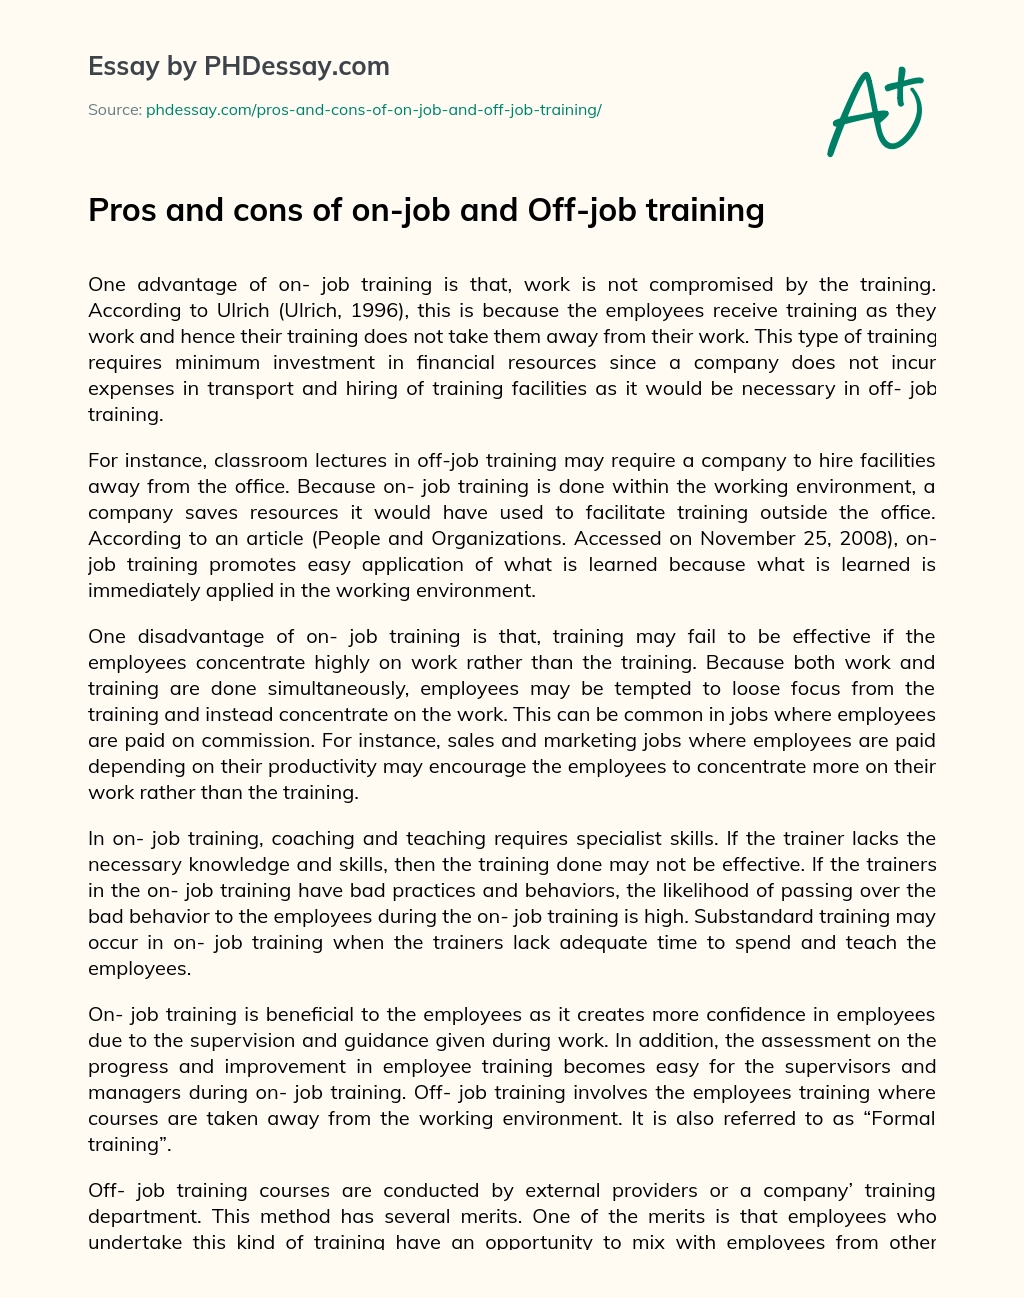 Pros and cons of on-job and Off-job training essay